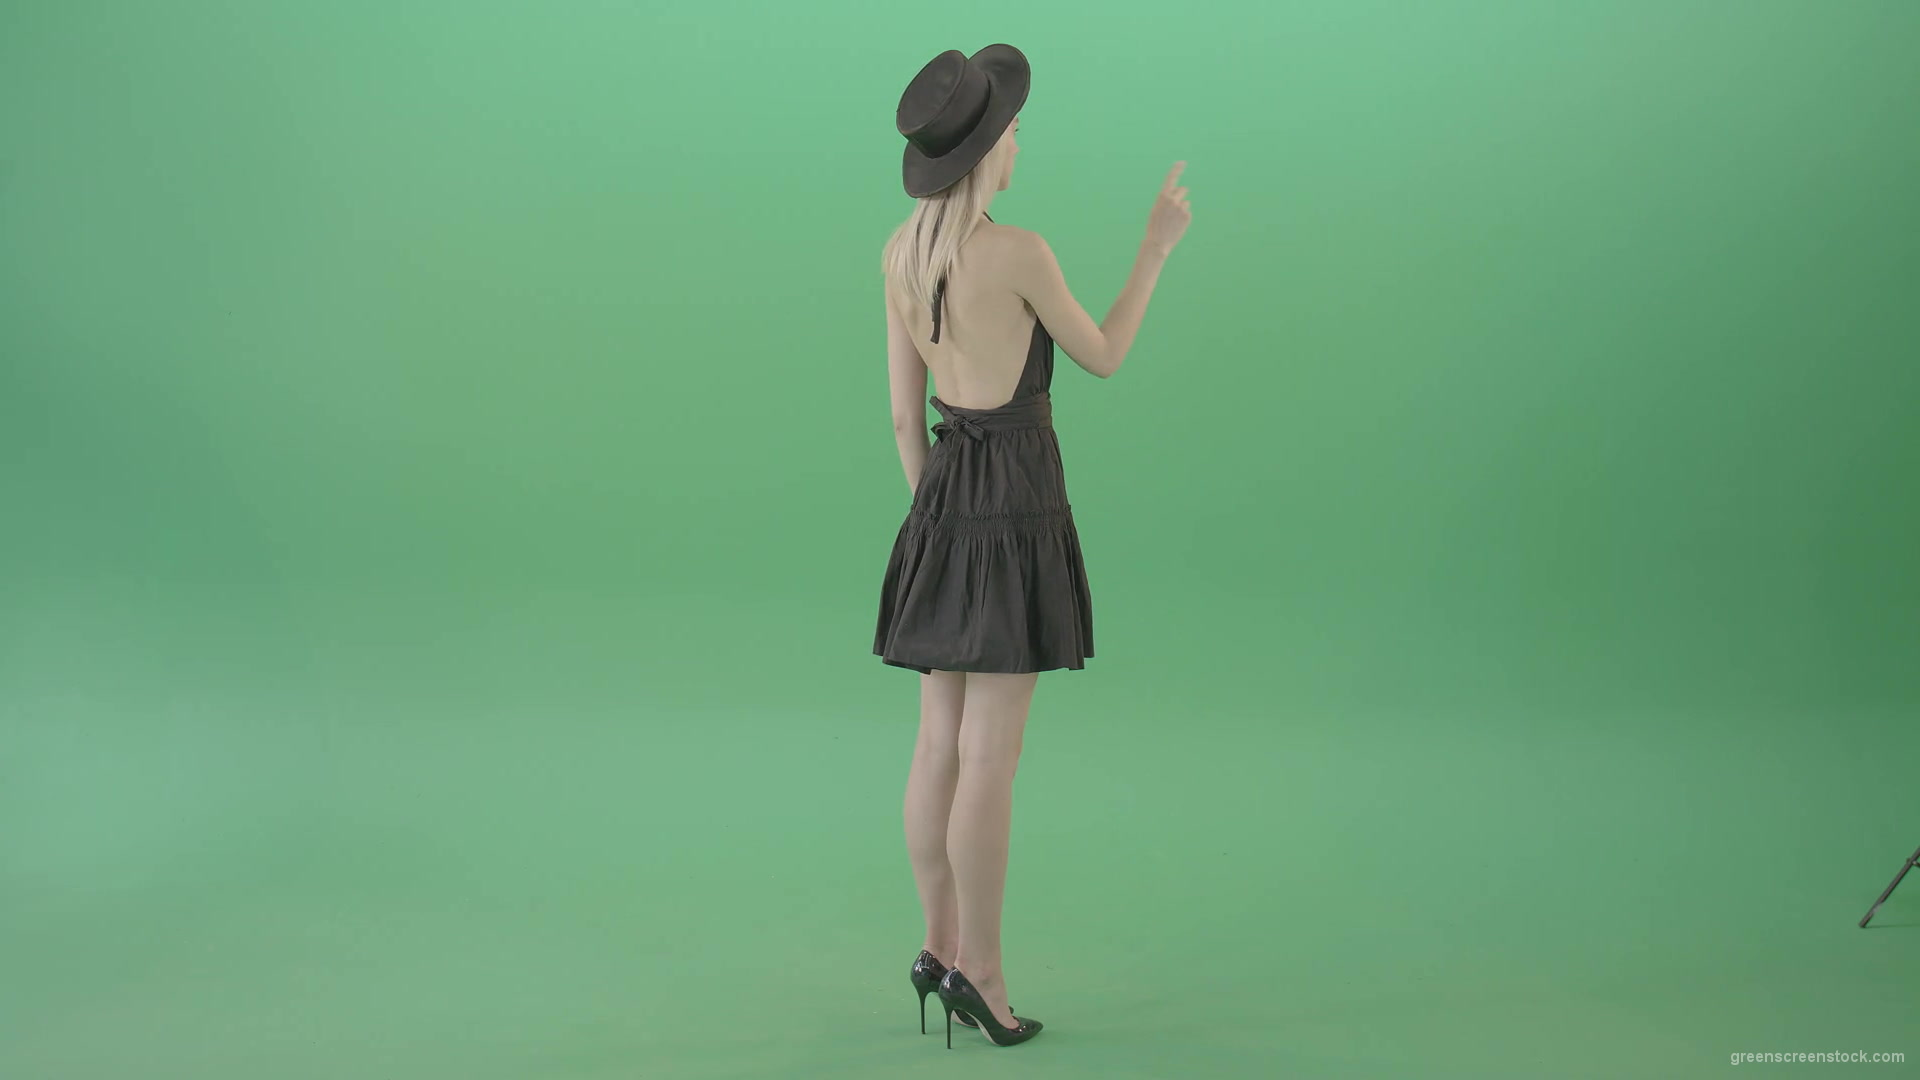 Full-size-fashion-girl-looking-virtual-products-on-touch-green-screen-4K-Video-Footage-1920_009 Green Screen Stock